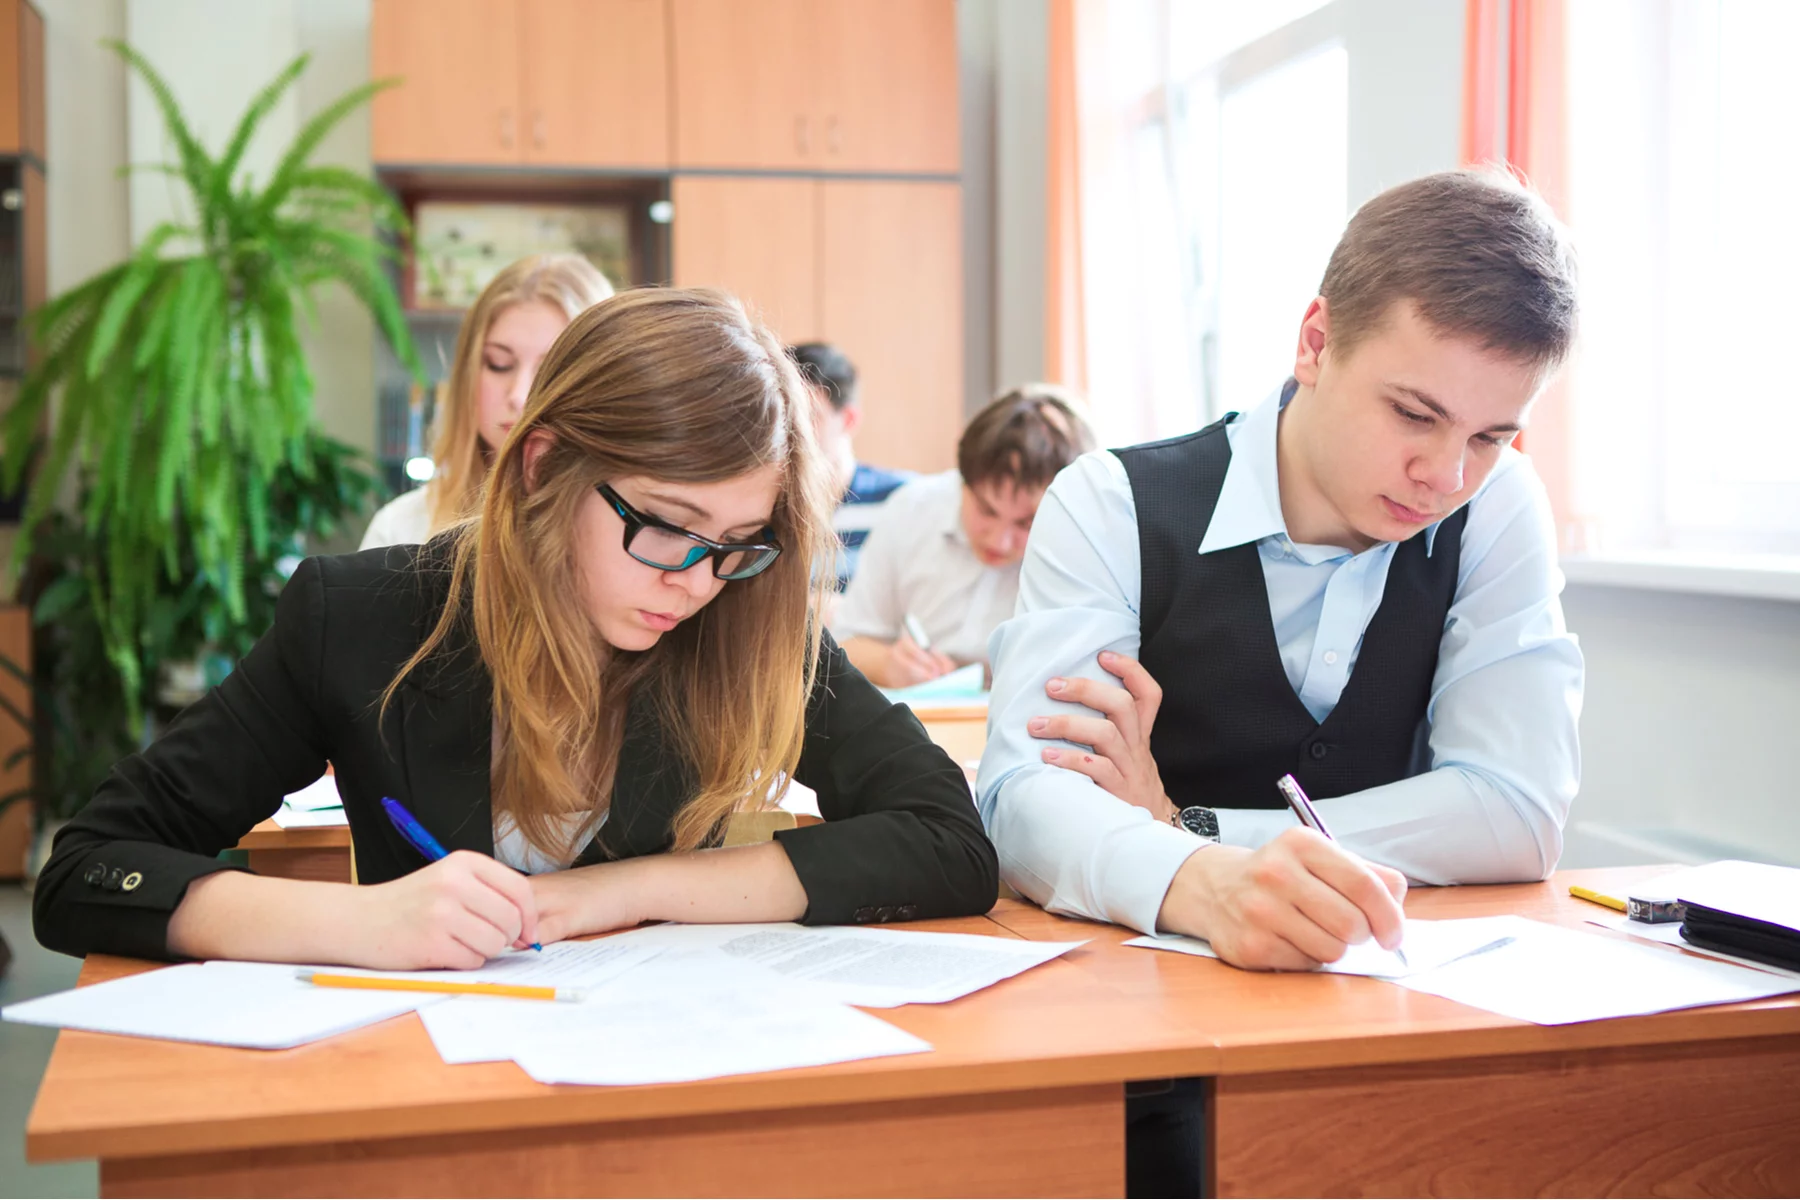 Secondary school students in Russia writing an exam